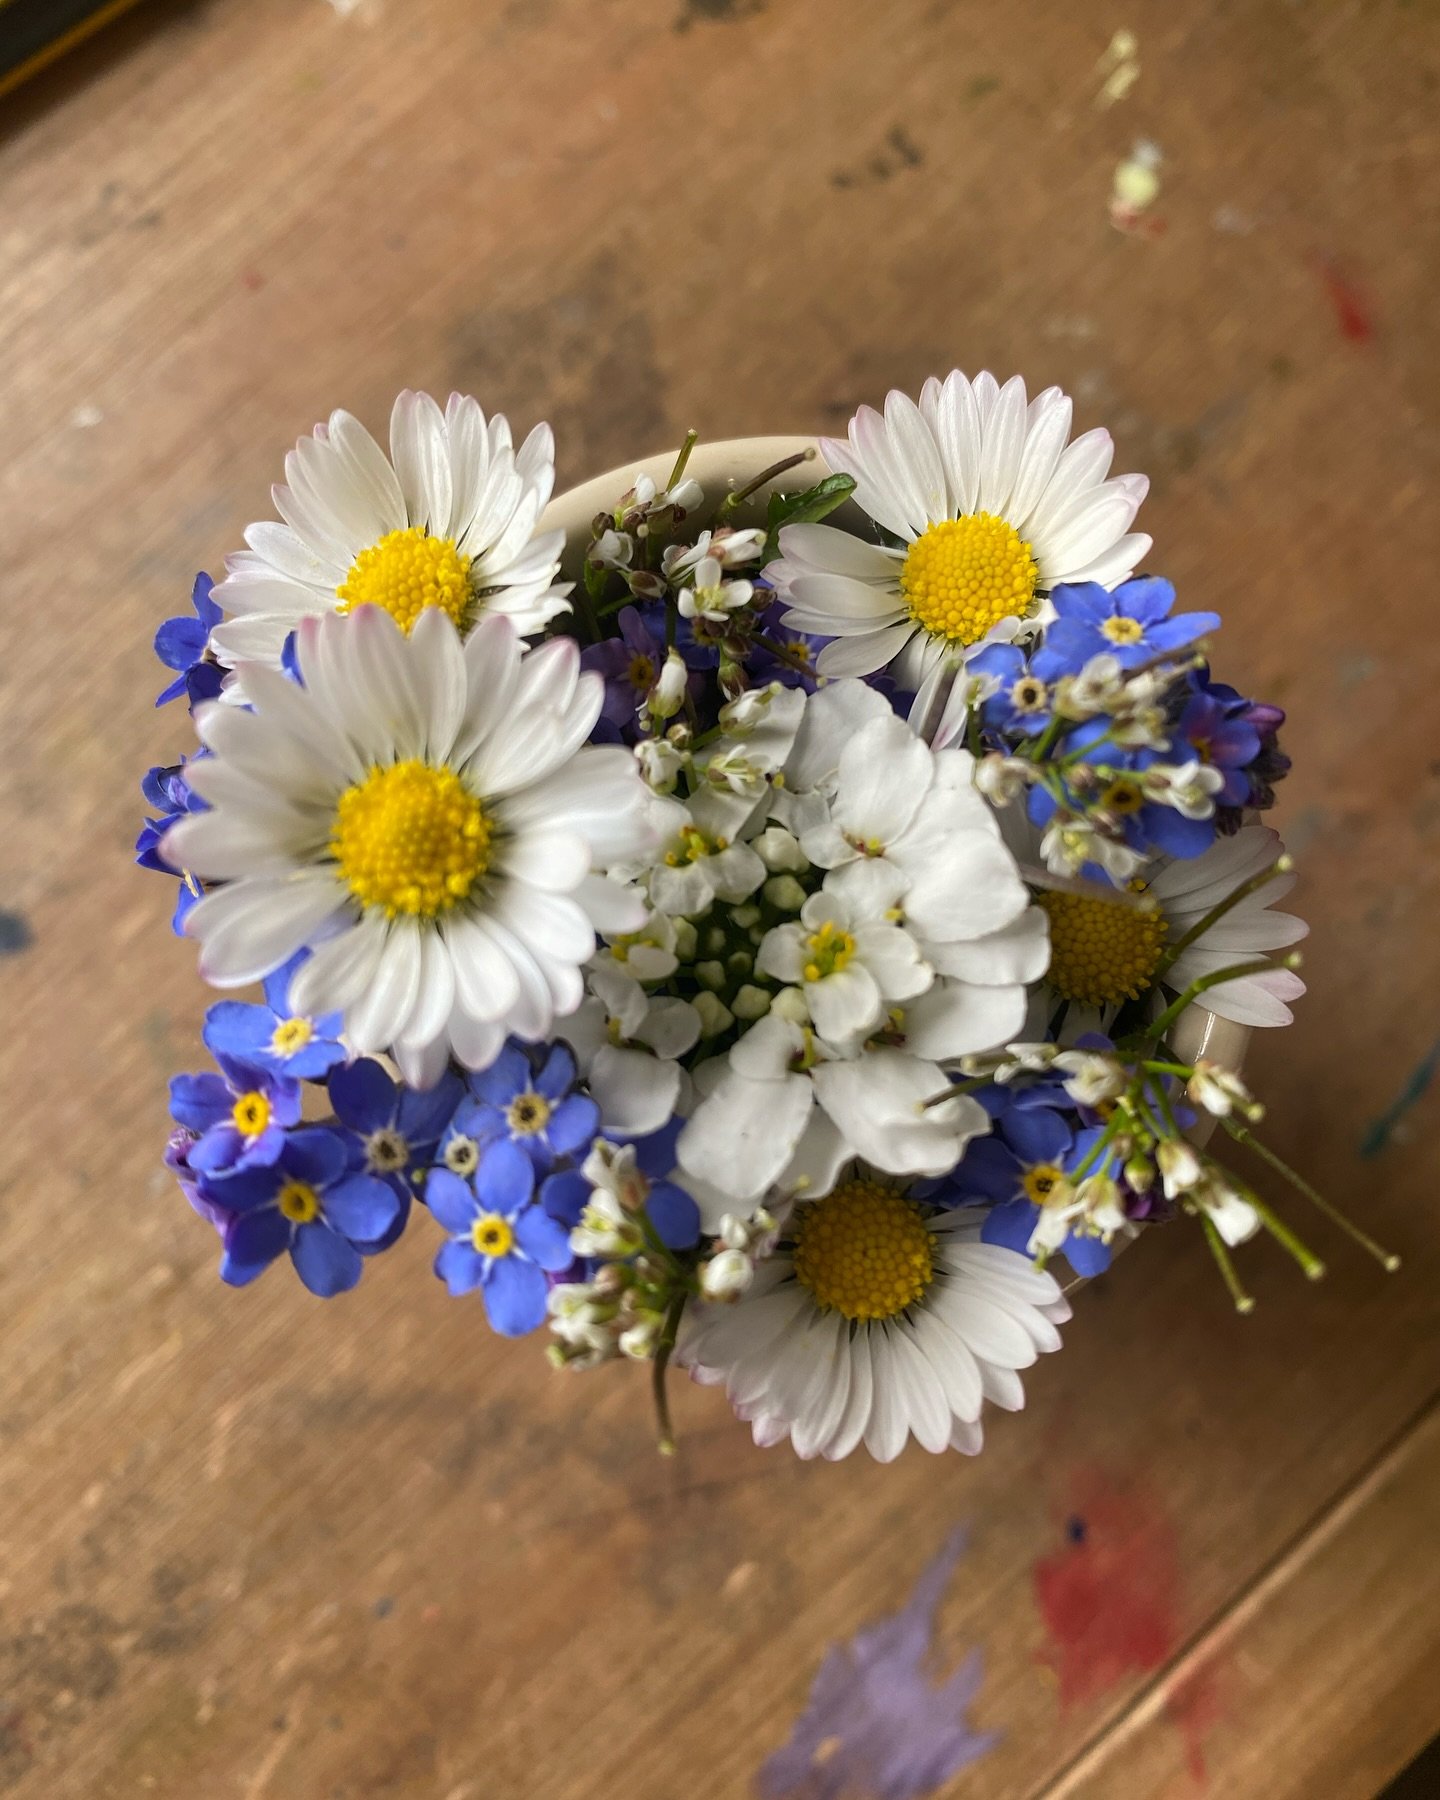 A posy for you 🍀I hope your week is a peaceful, gentle and kind one x

#posy #wildflowers #daisy #fliwerarrangement